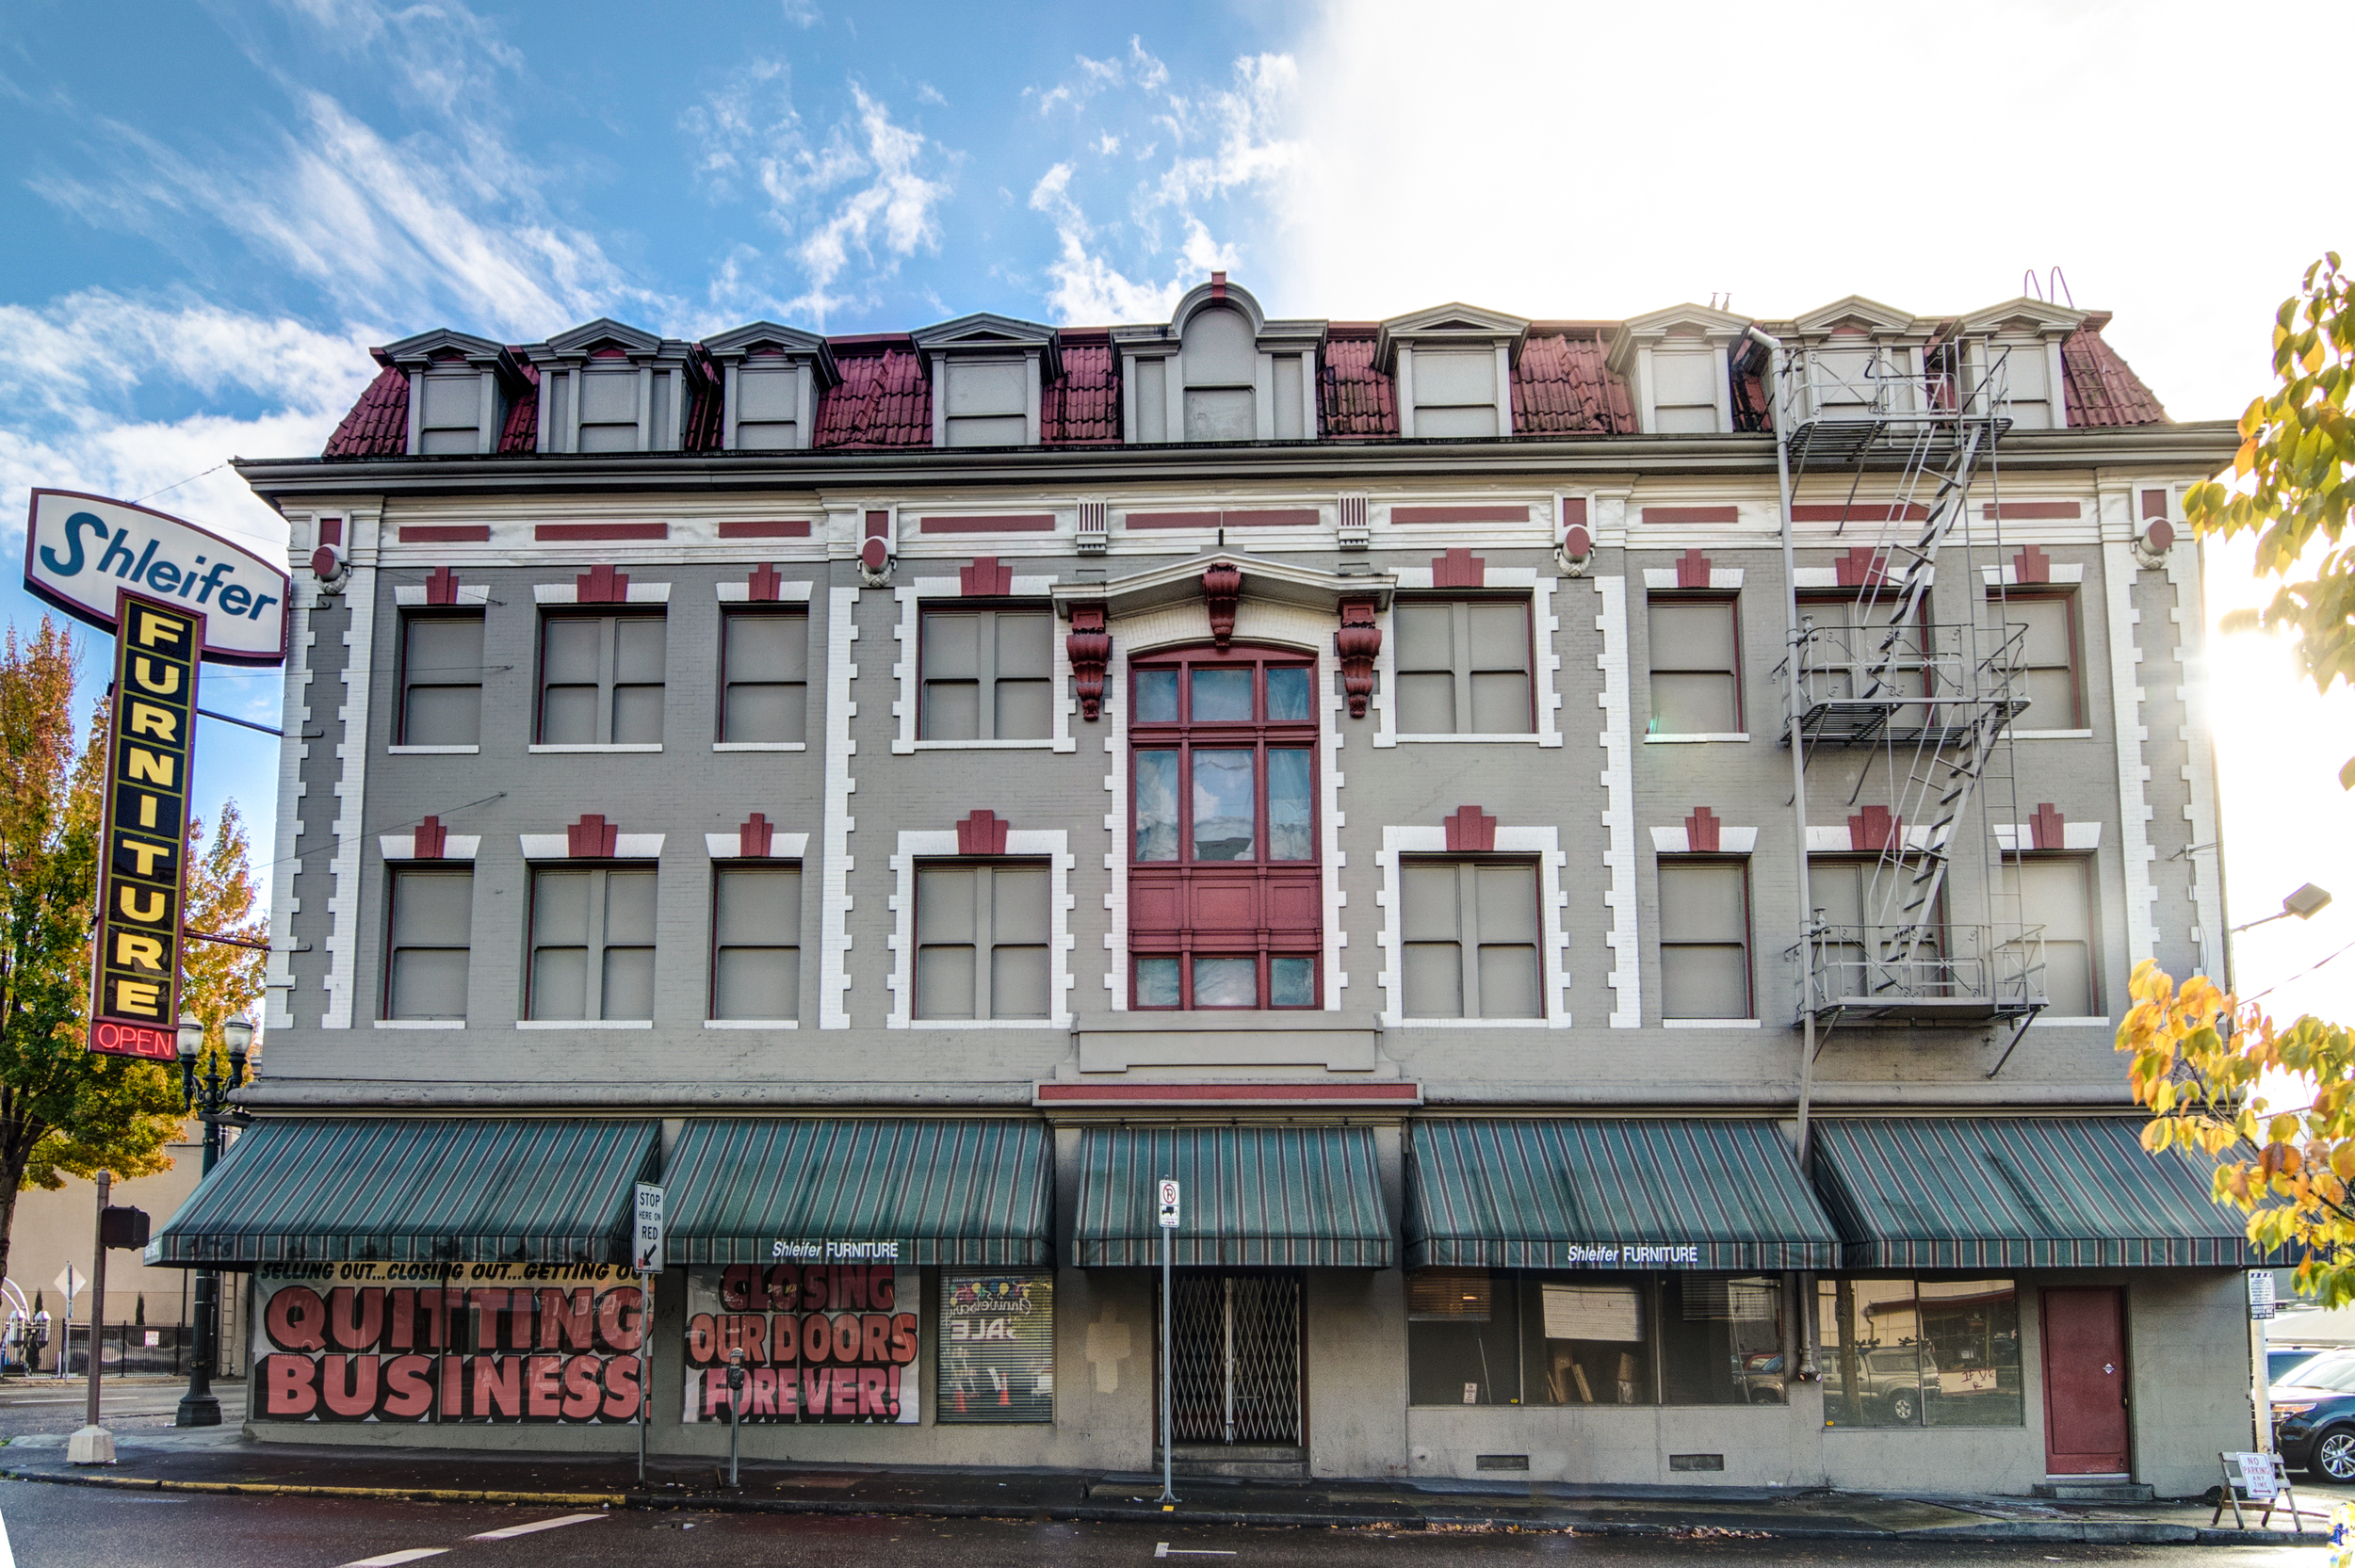 Shleifer Furniture To Shutter After 80 Years Will Clear Way For